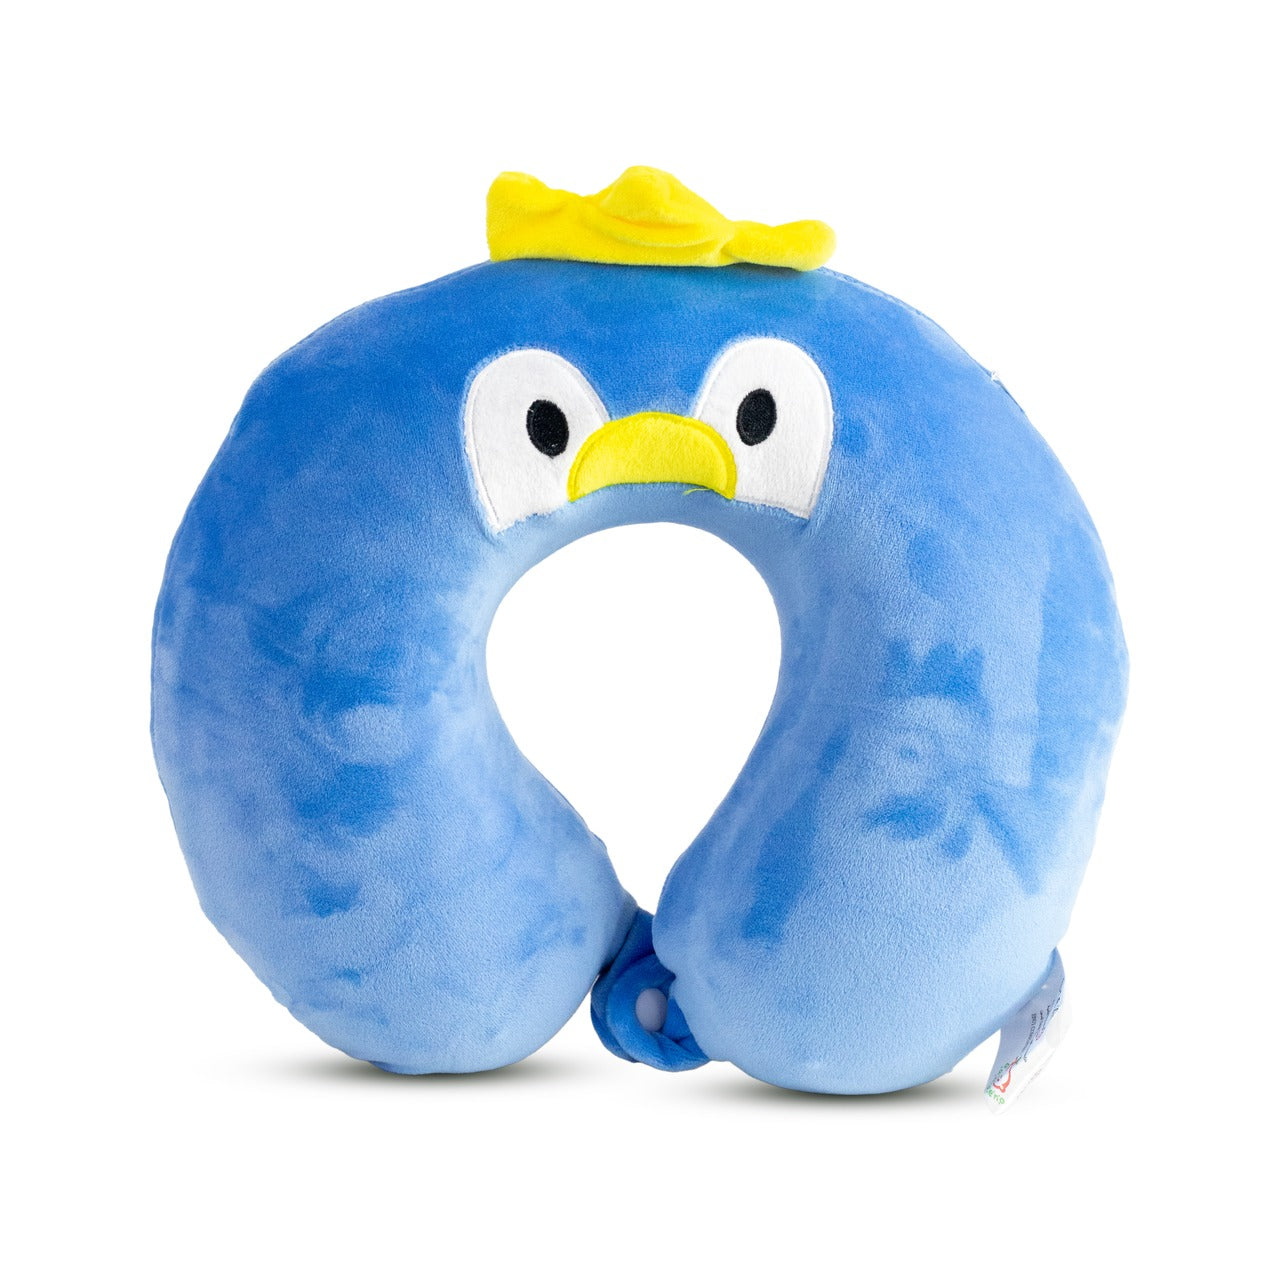 U-Shaped Soft Memory Form Kids Neck Pillow For Travel | Cute Cartoon Printed Neck Rest Cushion Zaappy